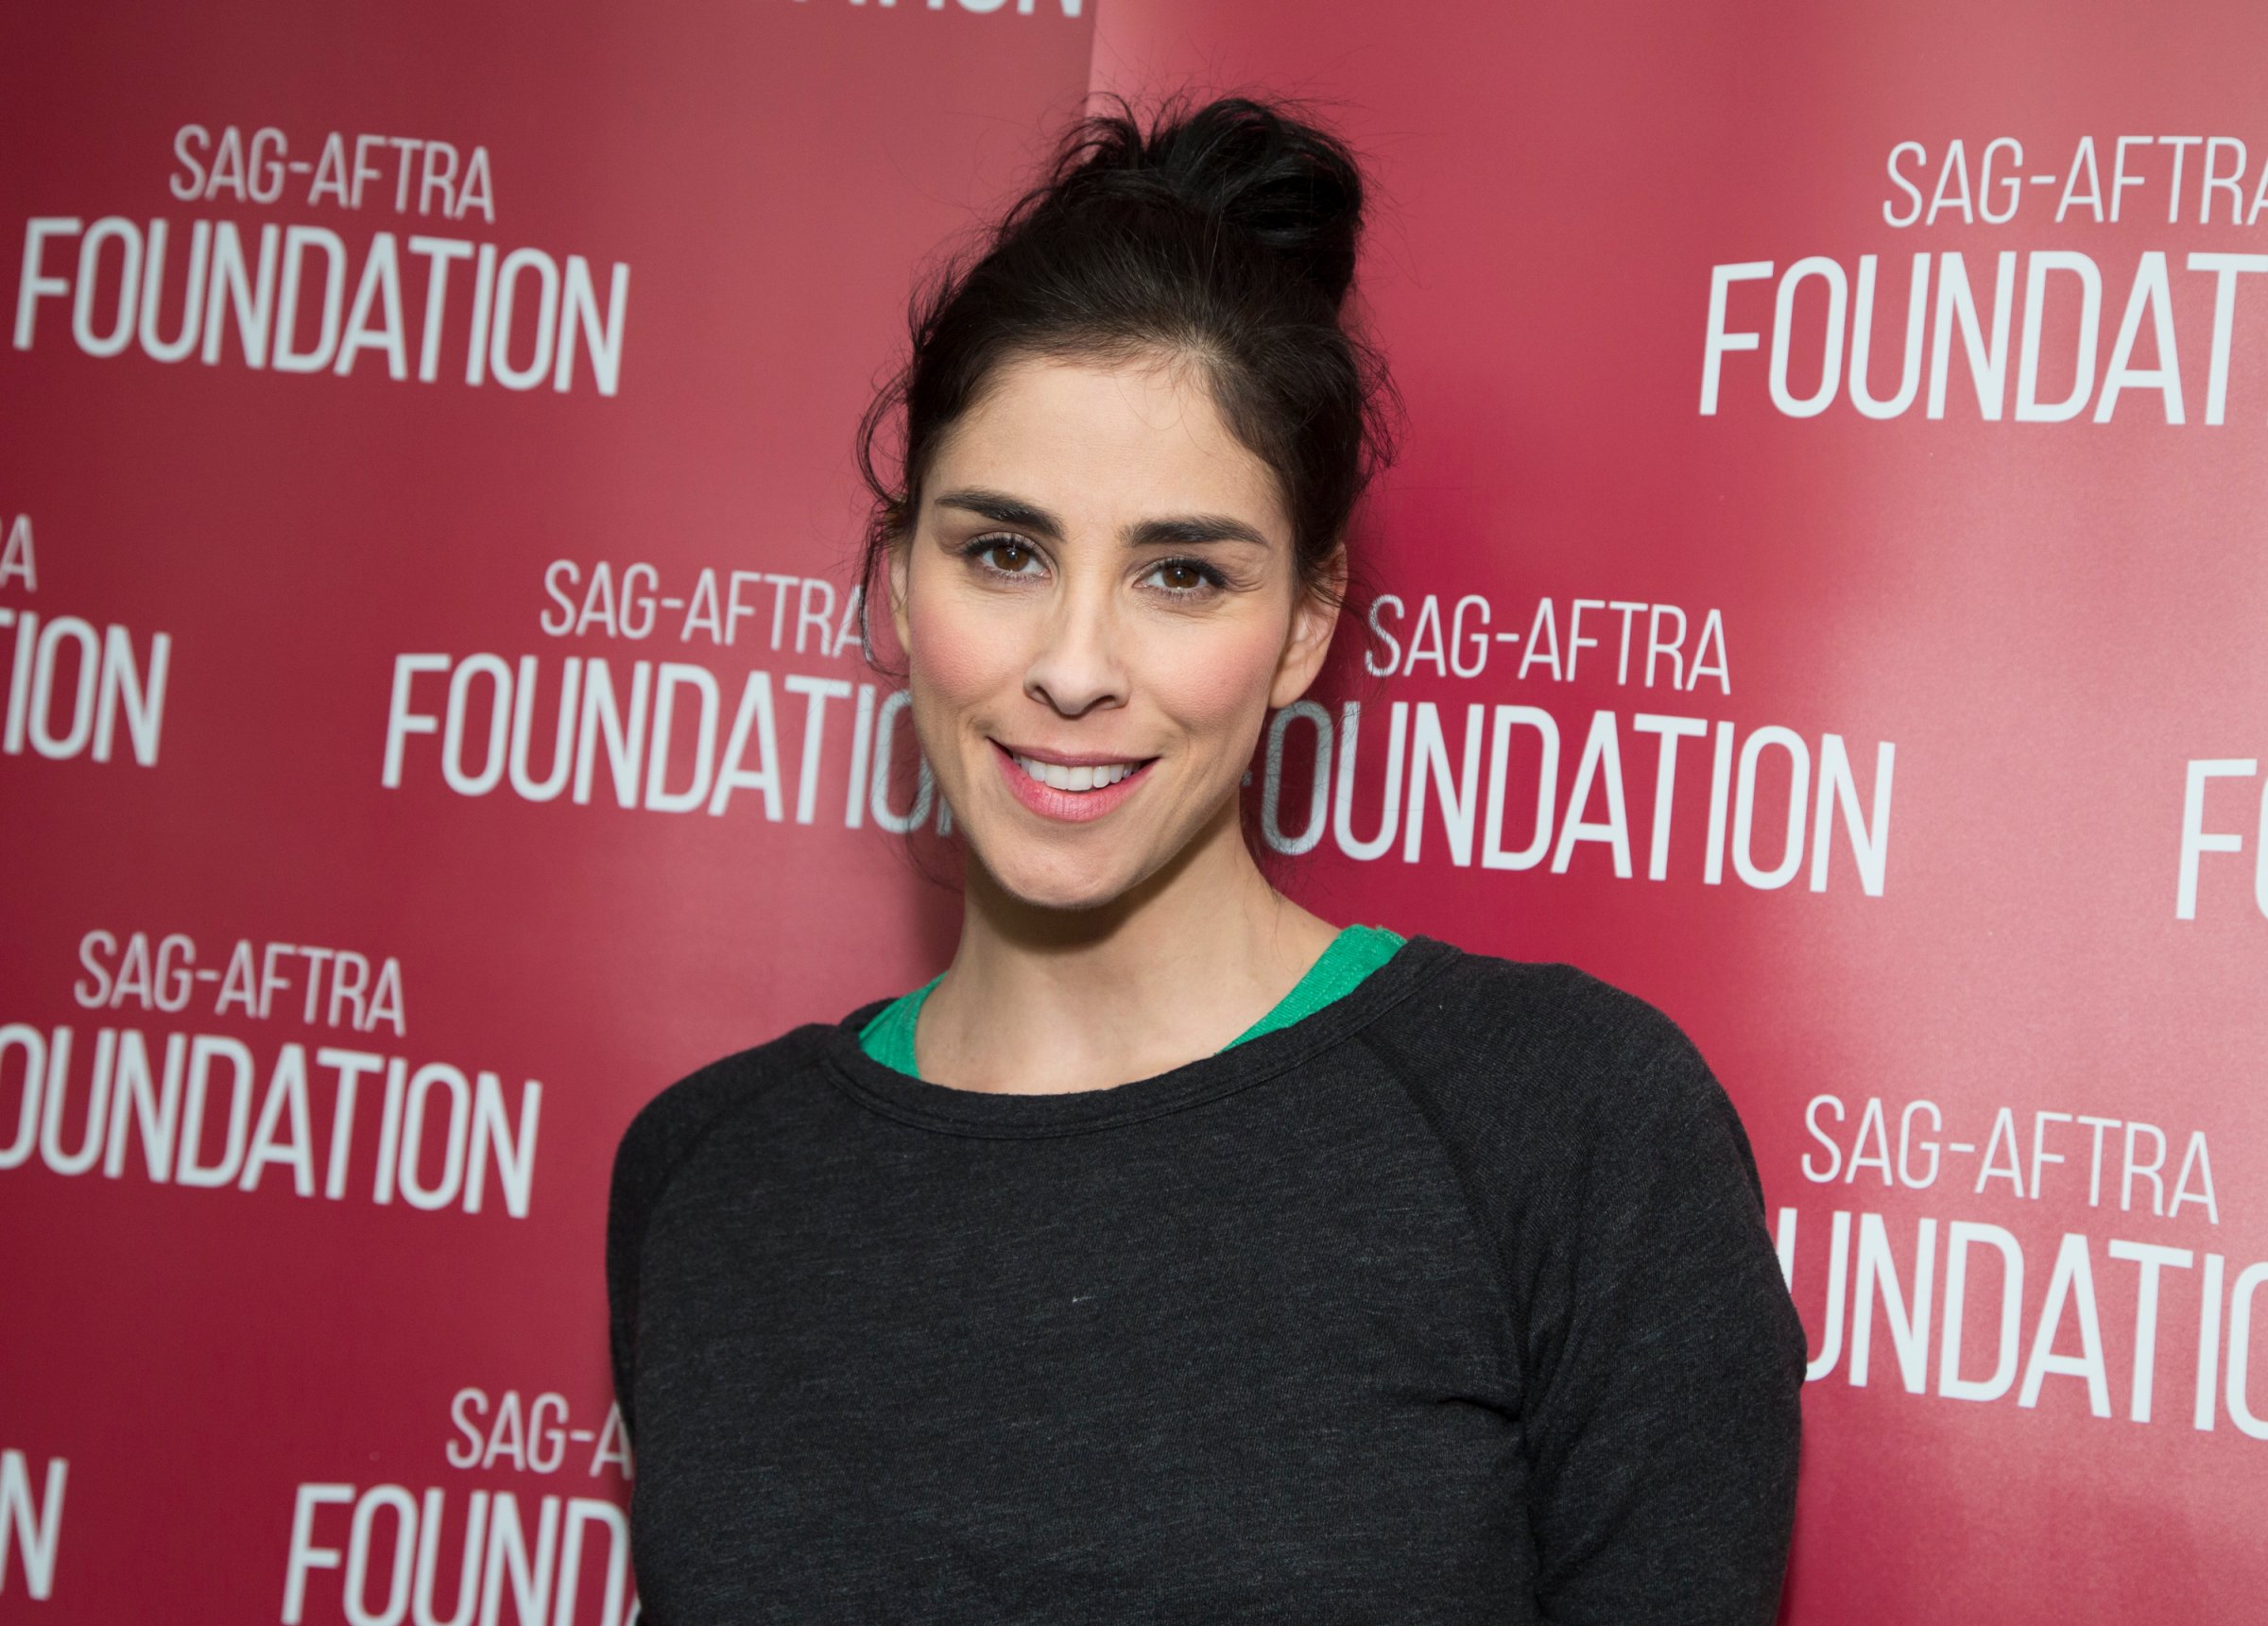 Actress Sarah Silverman attends the SAG-AFTRA Foundation conversations with Sarah Silverman for "I Smile Back" at at SAG-AFTRA on November 23, 2015 in West Hollywood, California.